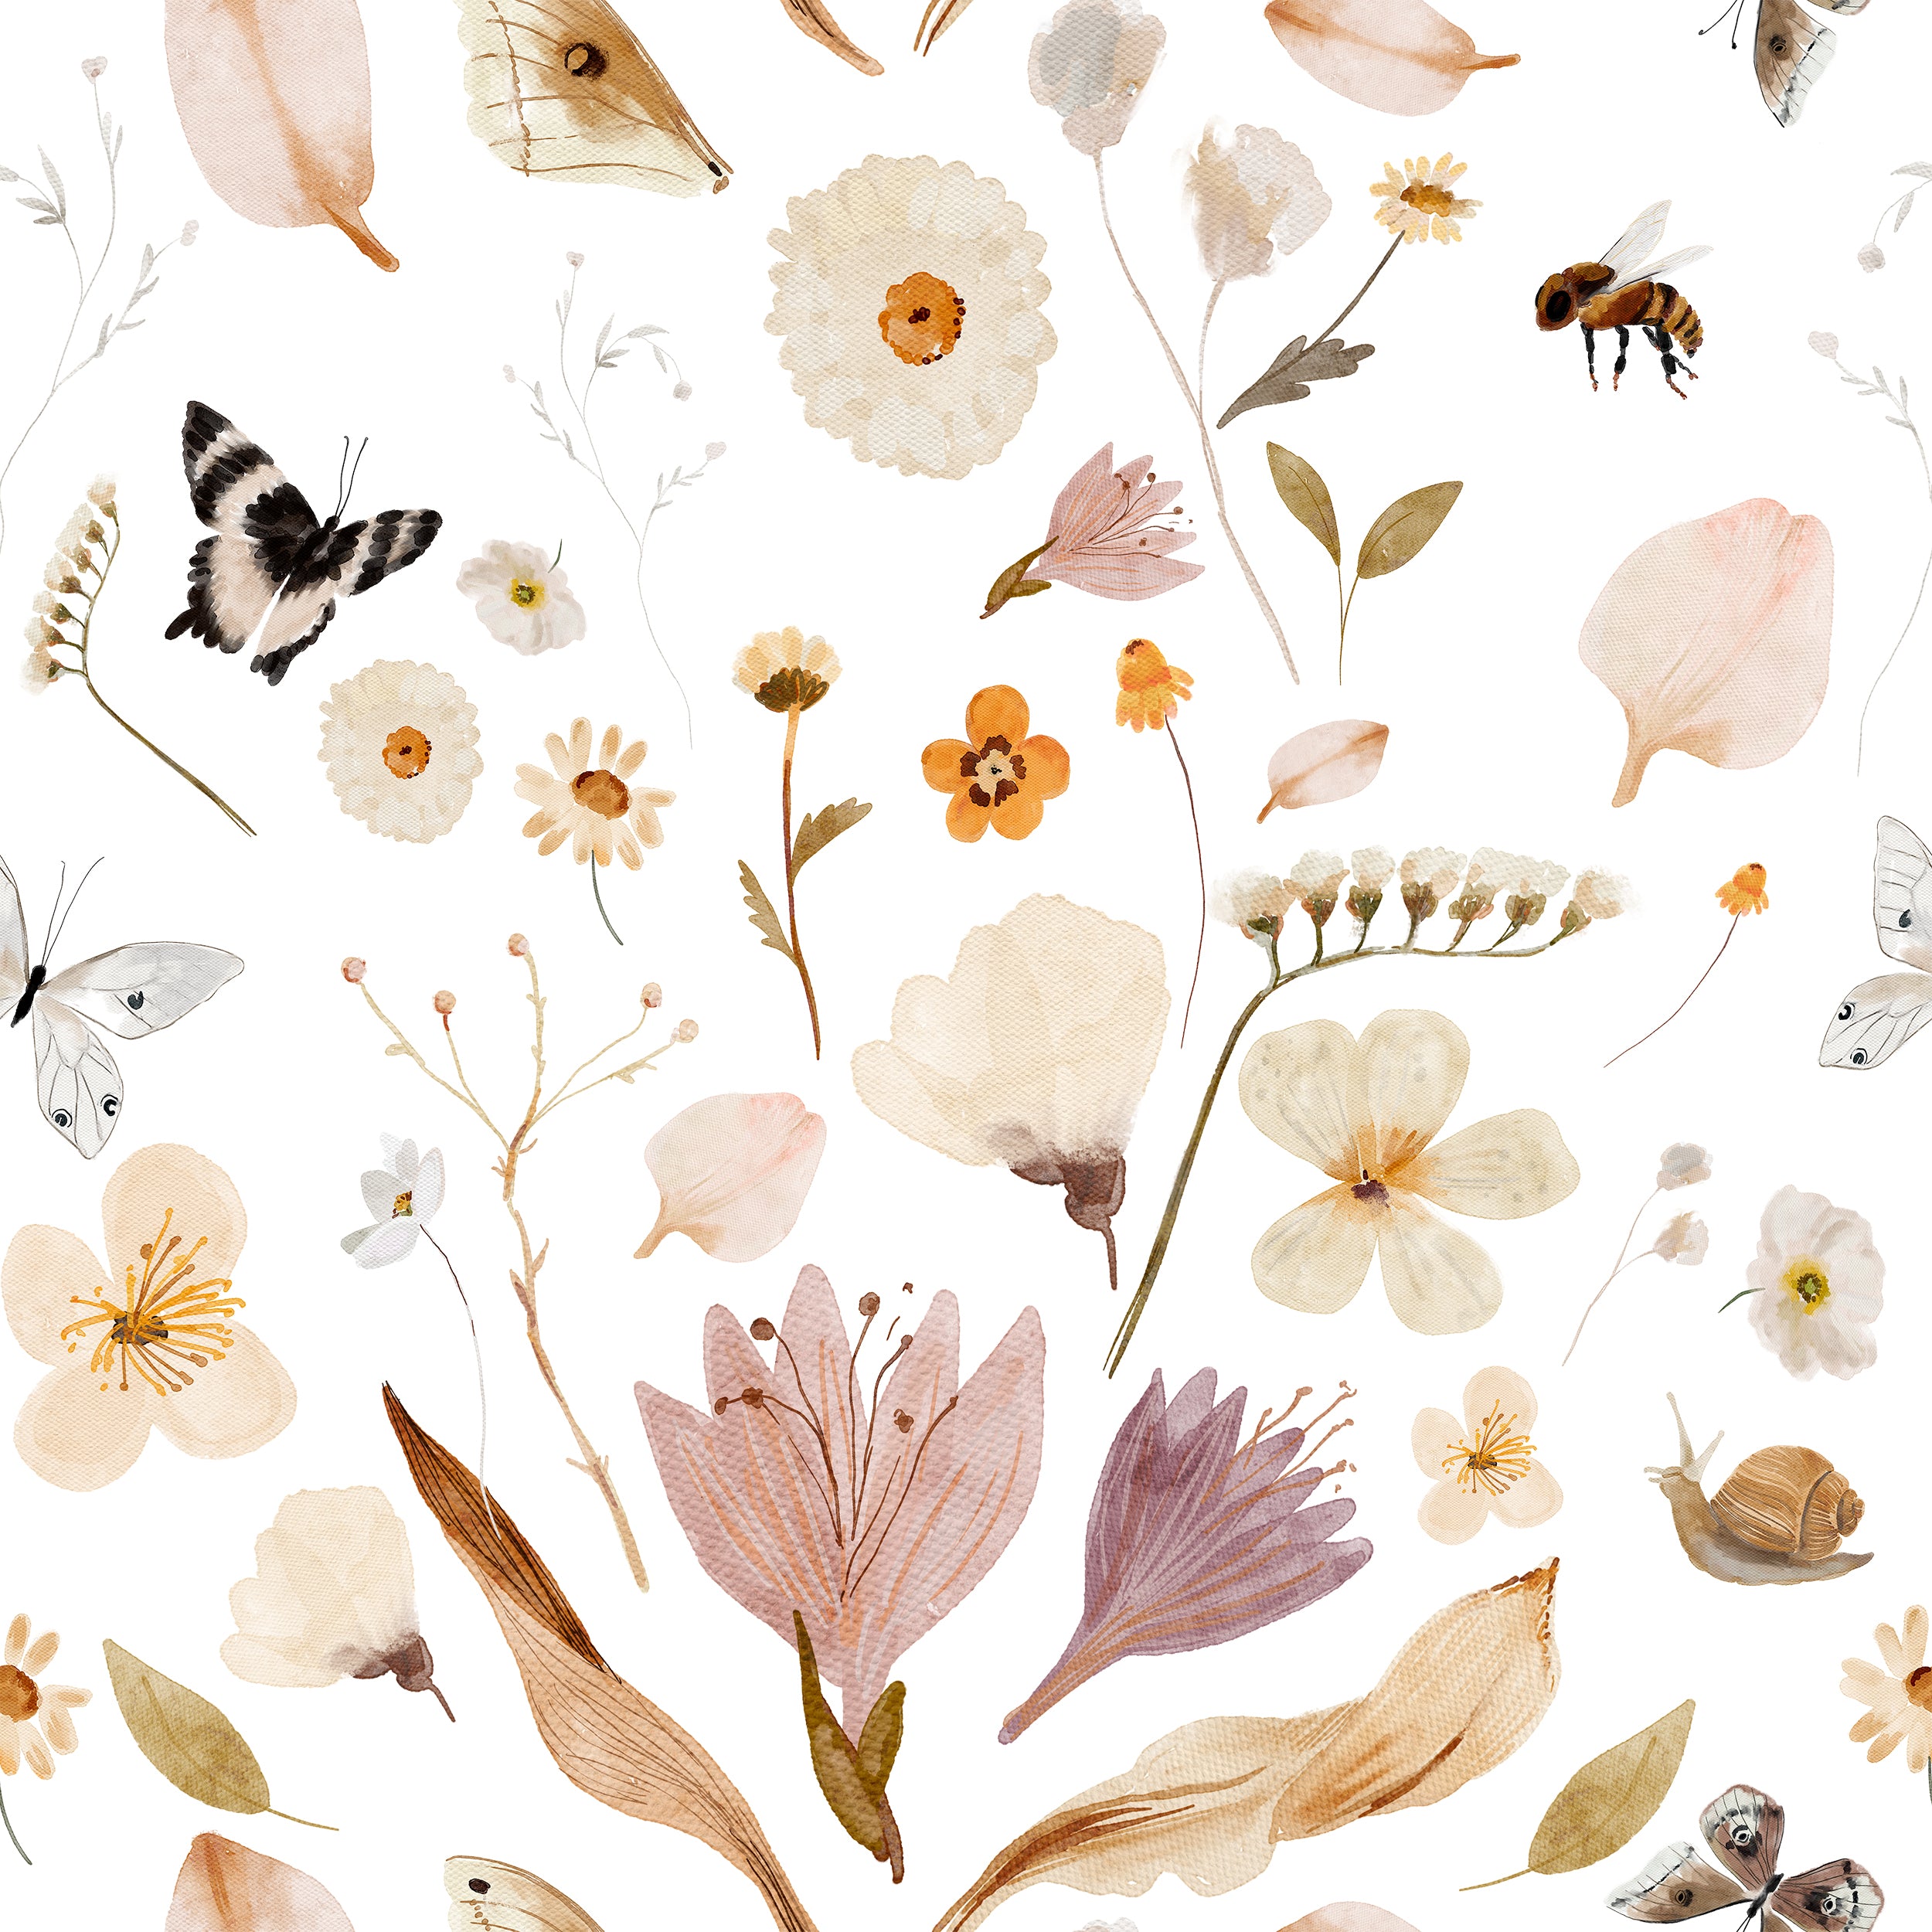 A square image showcasing the detailed design of the Boho Garden Wallpaper. A variety of botanical elements including flowers, butterflies, and foliage are artfully arranged in a bohemian style, with a color palette of muted pinks, yellows, and greens on a clean white background.